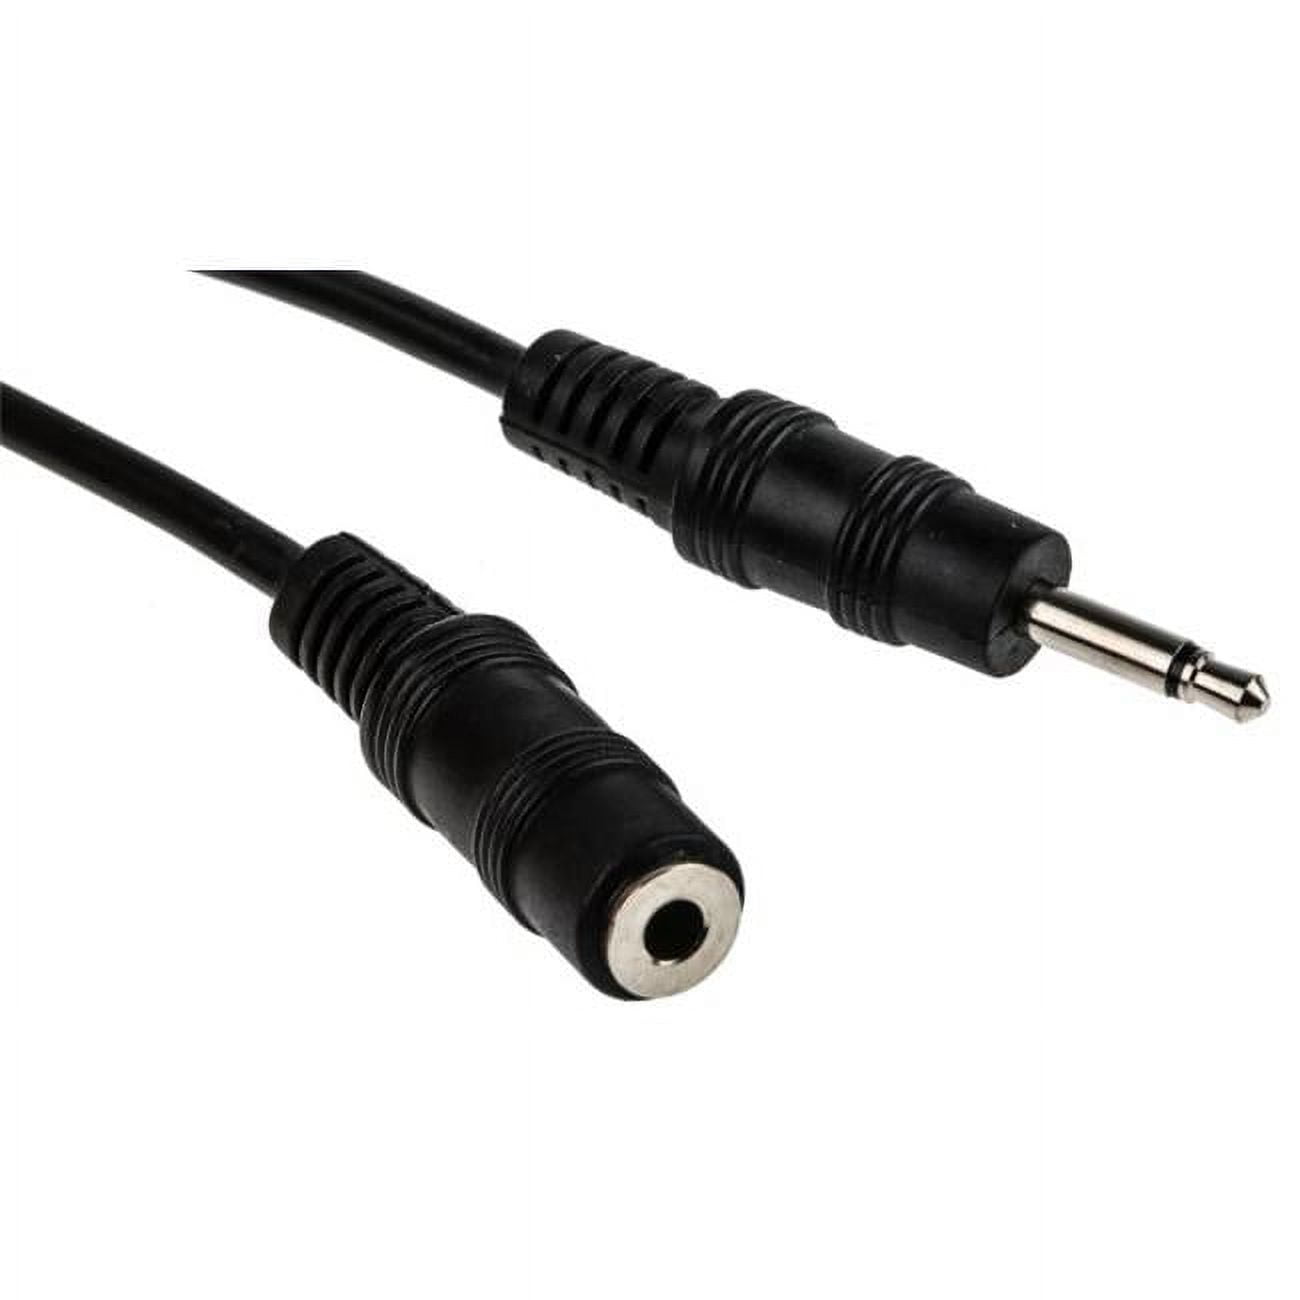 Aish 12 ft. 3.5 mm Slim Mold Stereo Male to Stereo Male Auxilary Cable